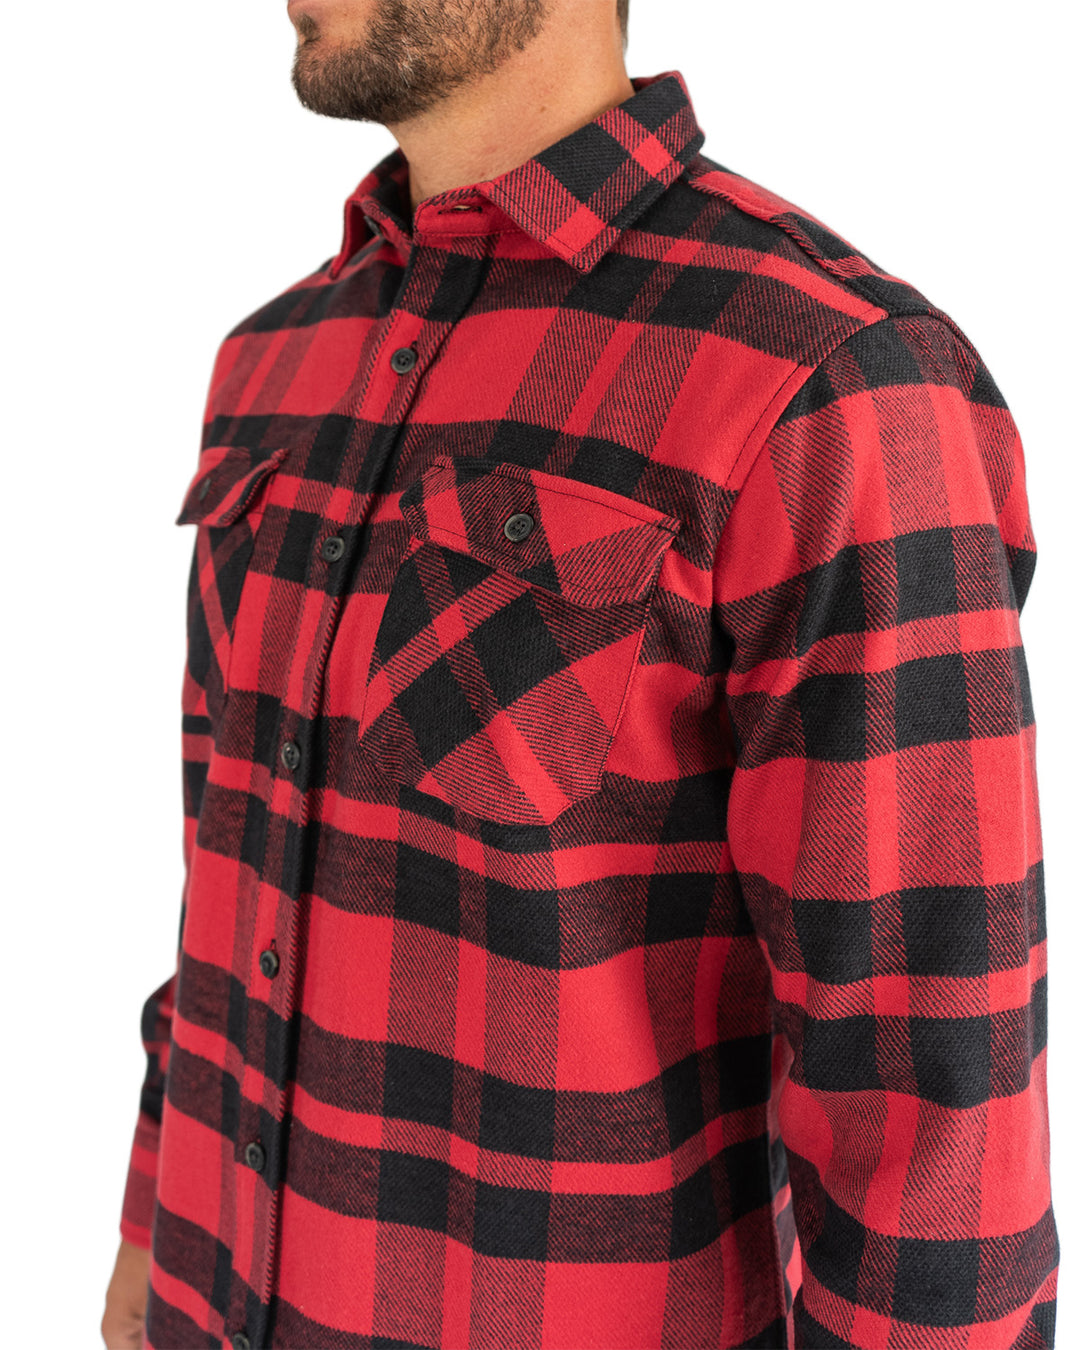 Field Grand Flannel in Red Plaid, 100% Cotton Flannel Shirt for Men by MuskOx